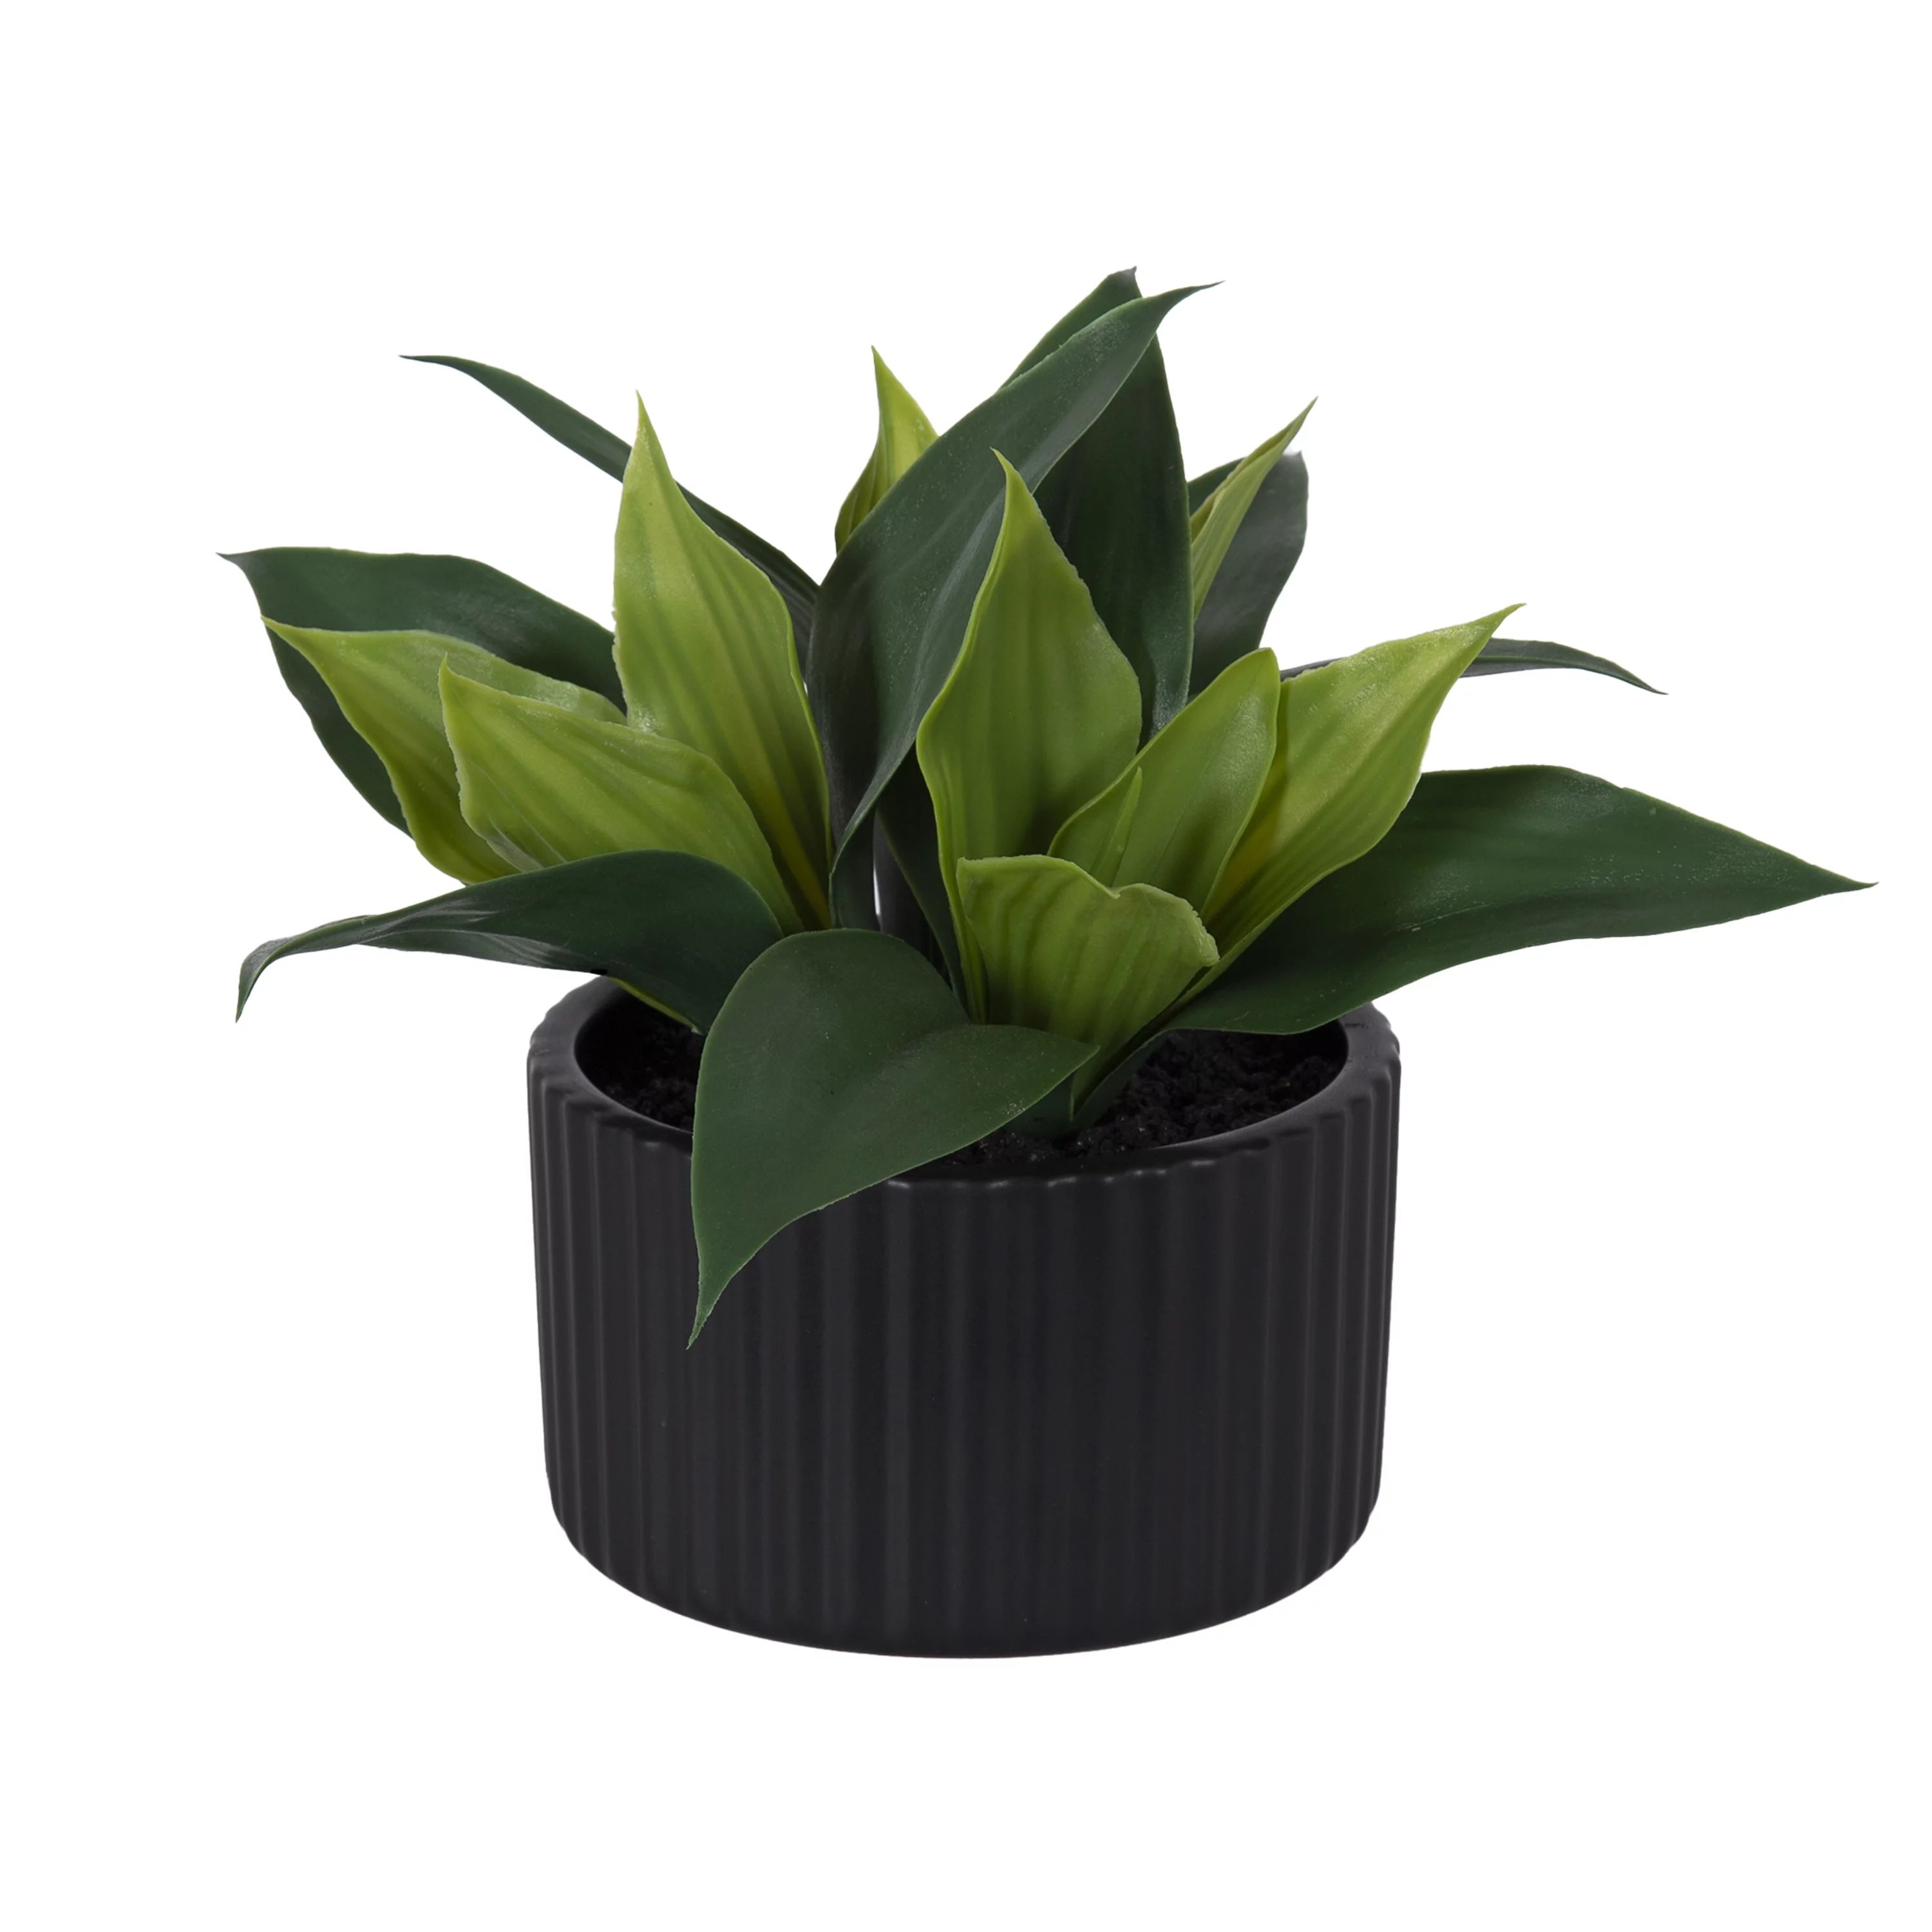 Better Homes & Gardens 8.5" Artificial Agave Plant in Ribbed Black Ceramic Pot | Walmart (US)